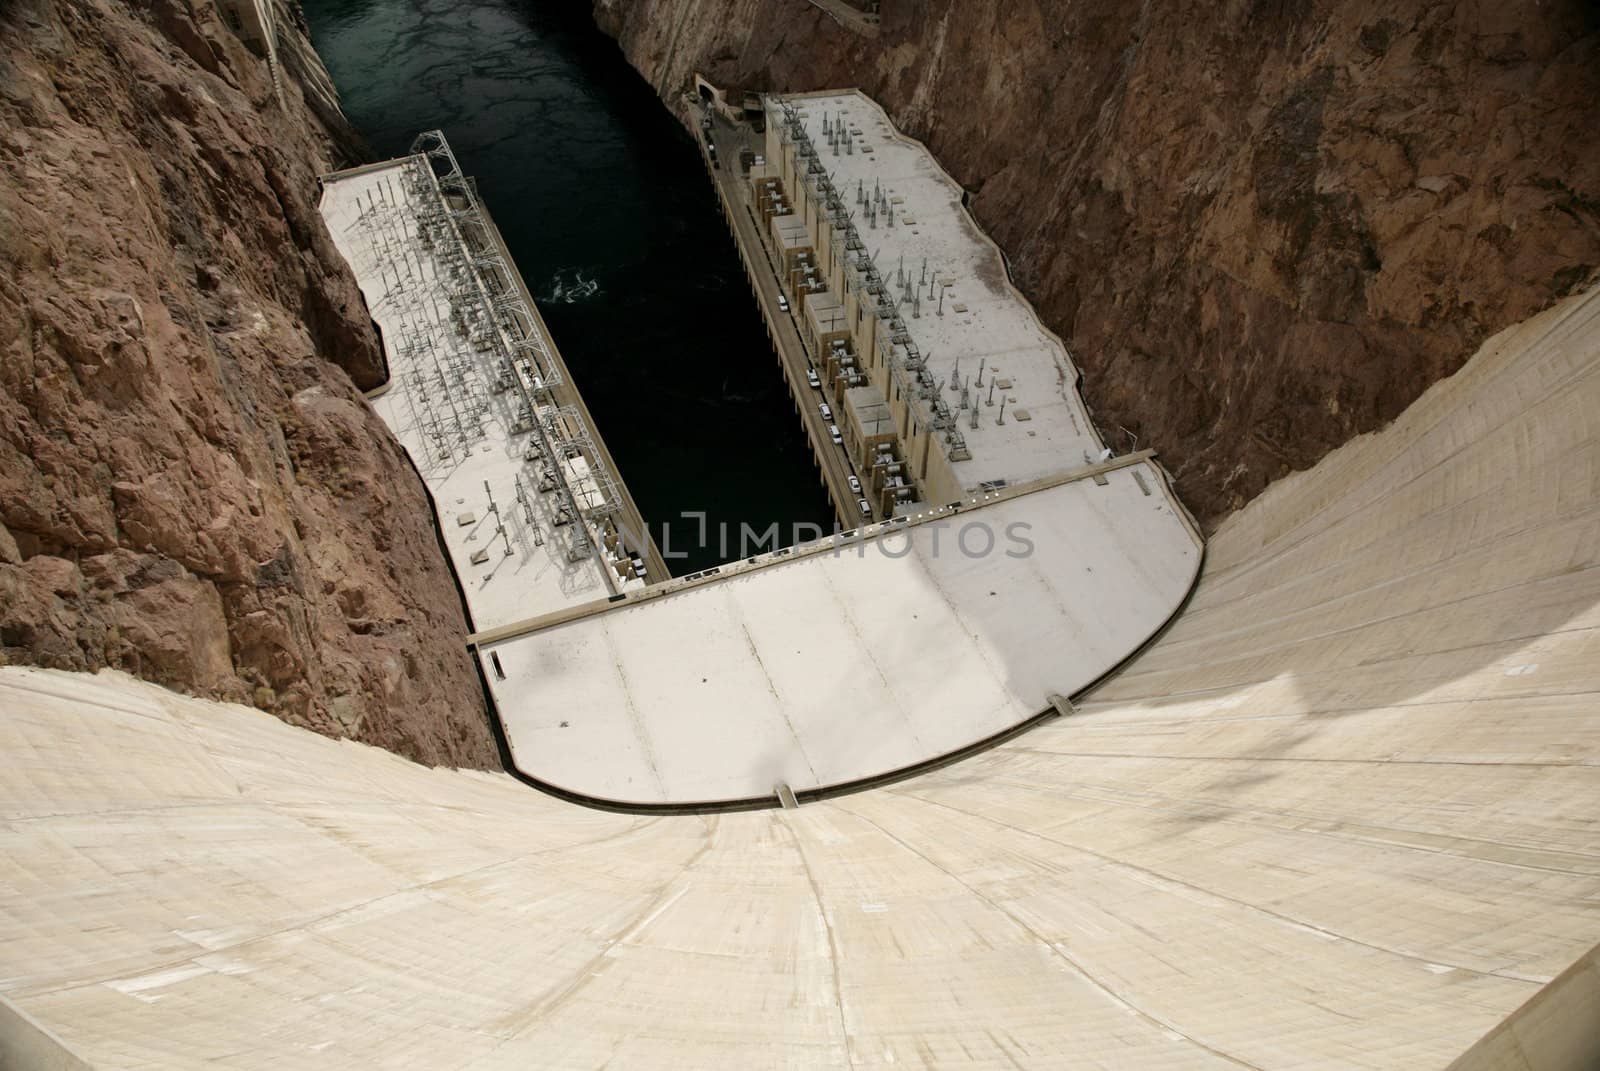 wide angle view down at the hoover dam